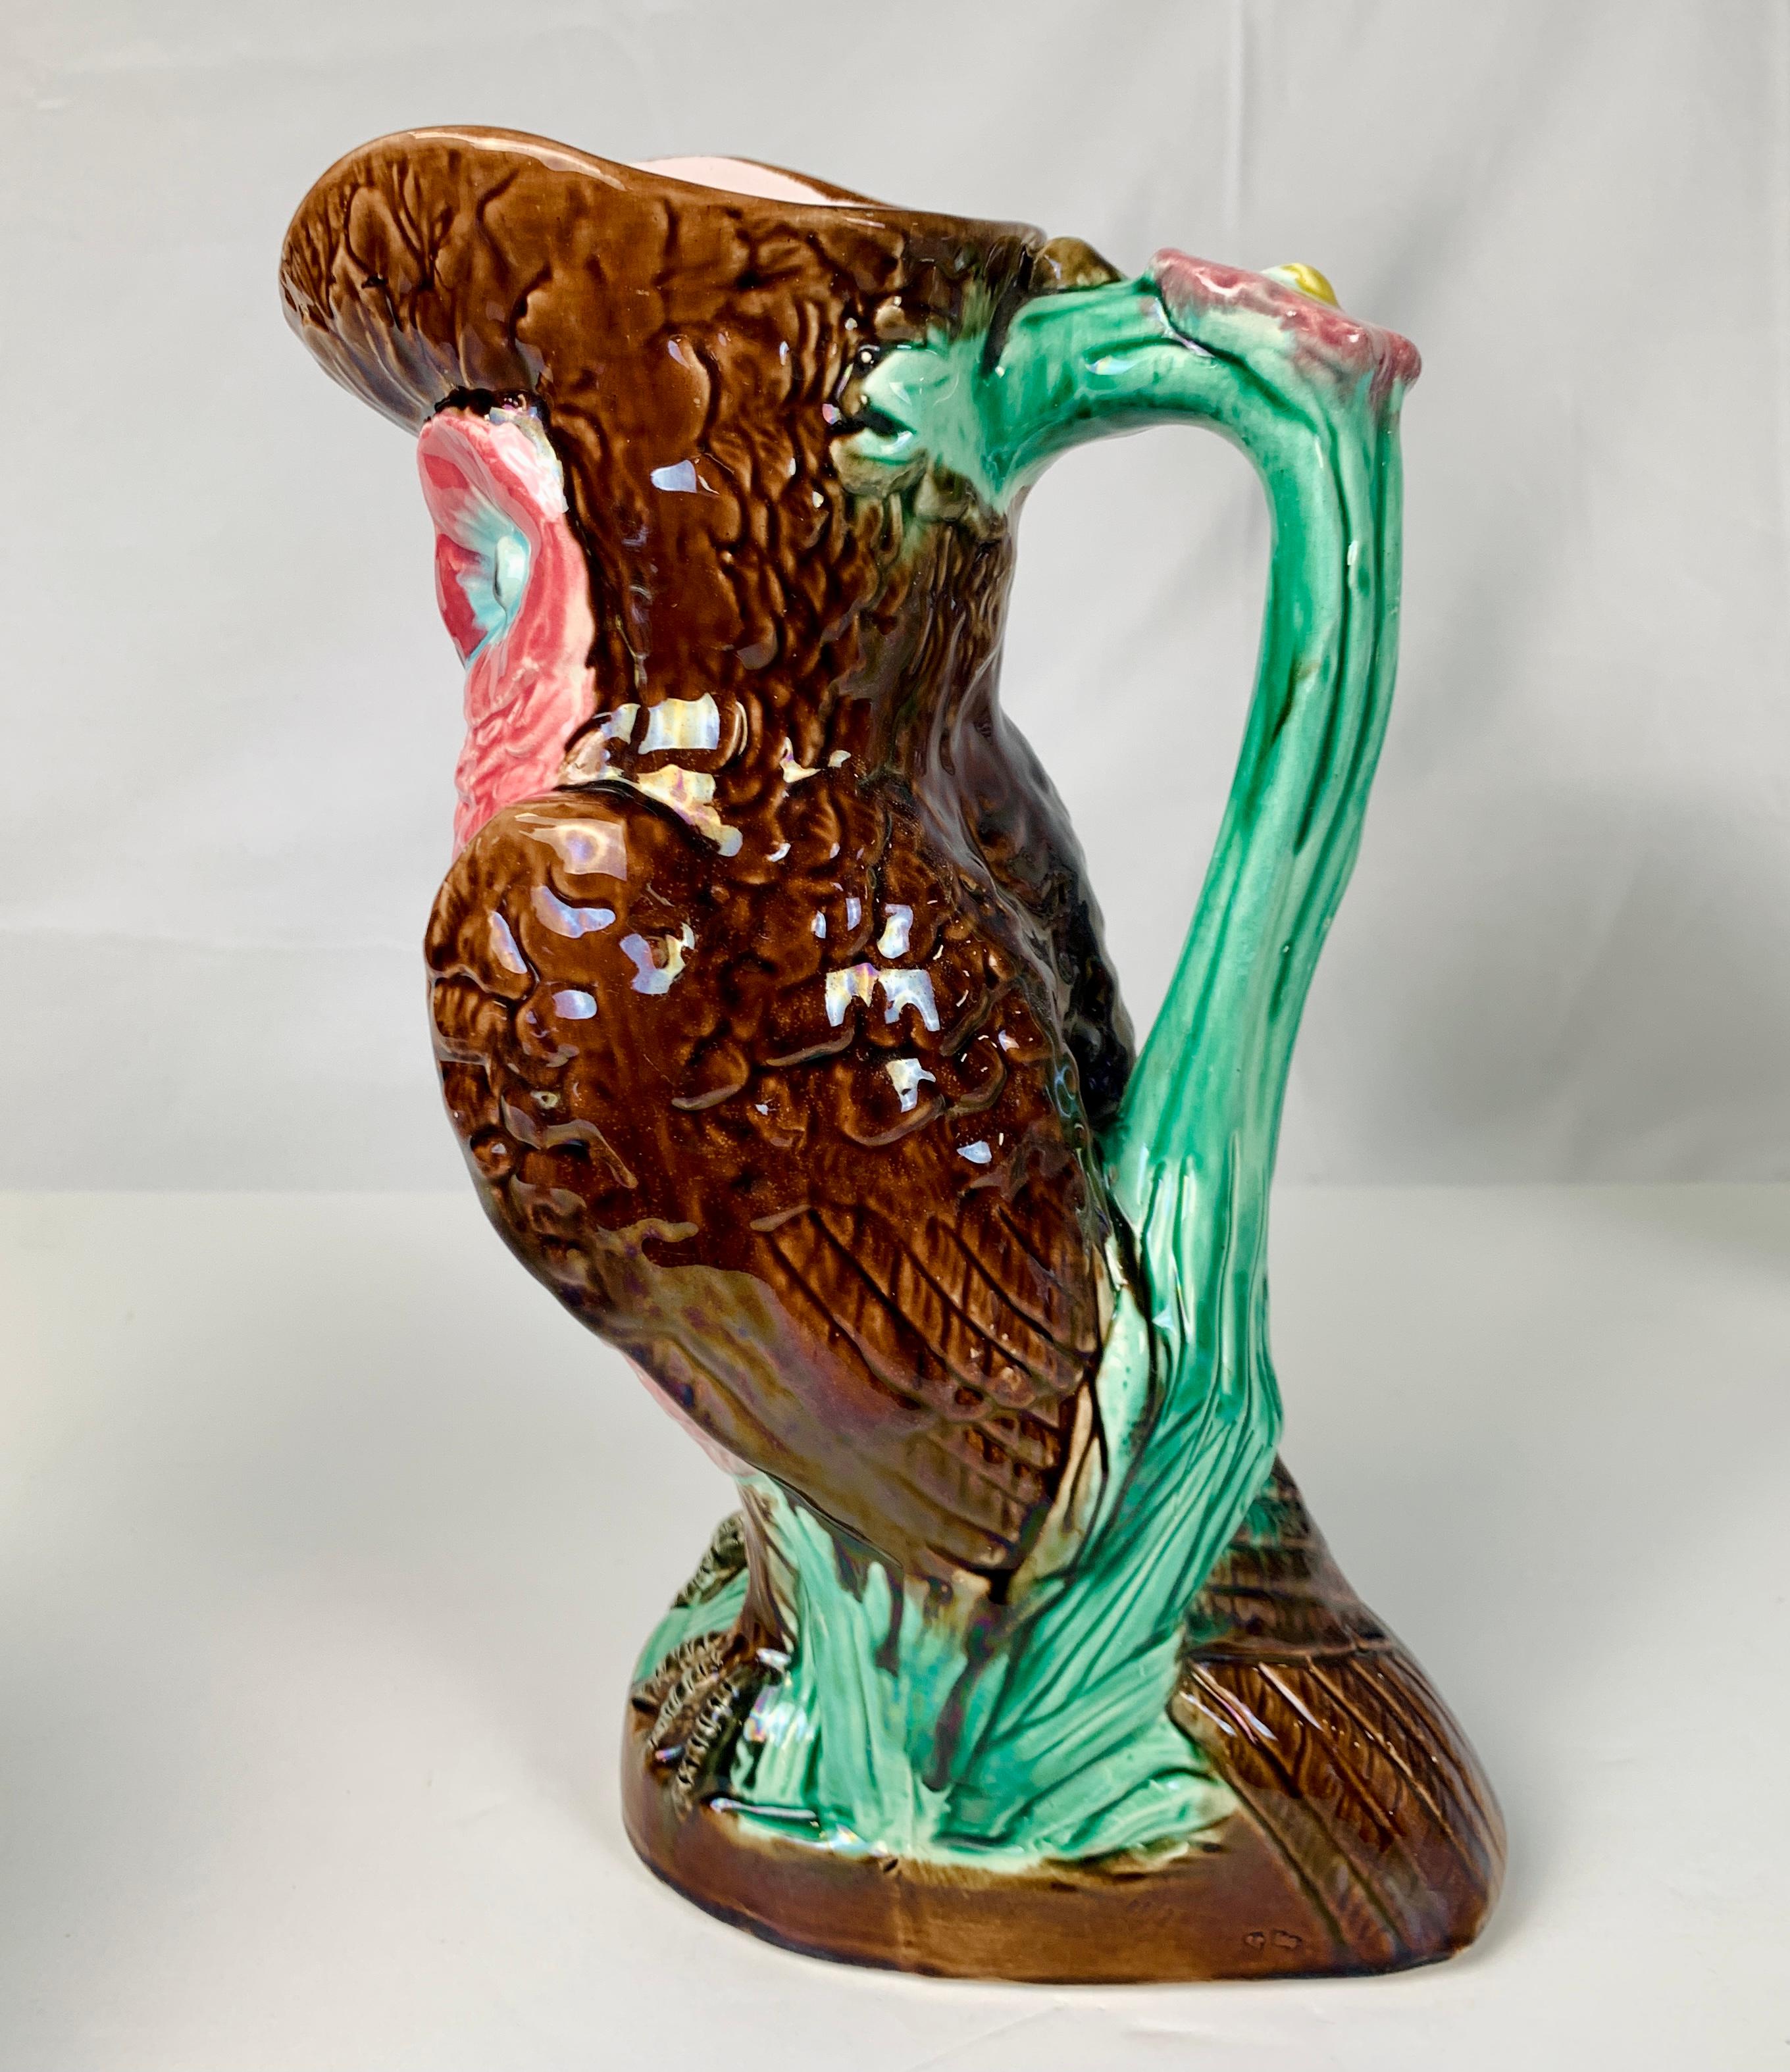 Enameled Large Majolica Owl Pitcher Art Nouveau Style Made in England, Late 19th Century